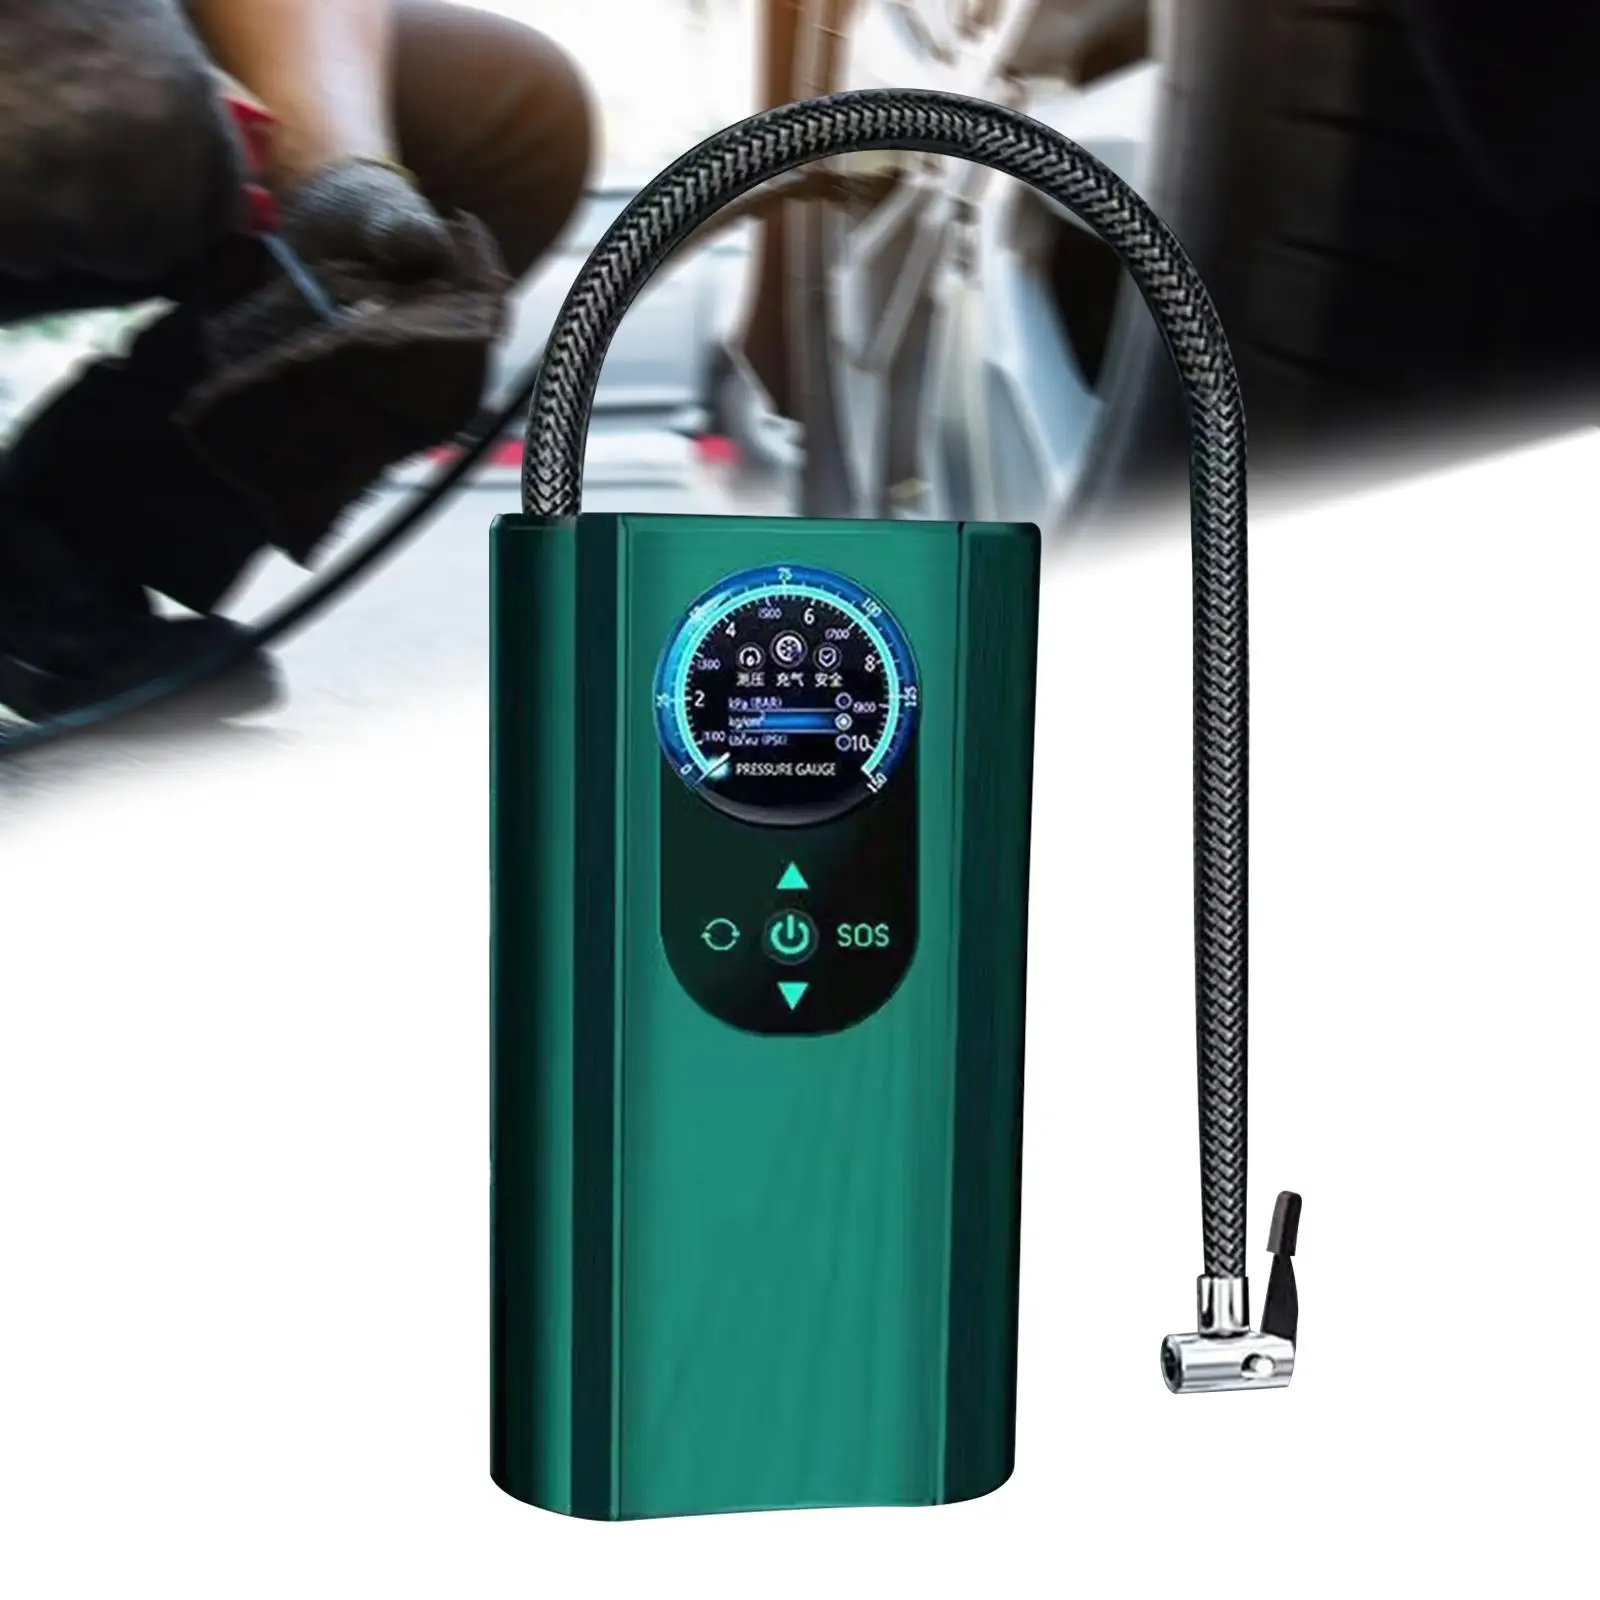 Portable Air Compressor with Tire Pressure Gauge Handheld Multipurpose Tire Inflator for Bicycle Car Ball Basketball Bike